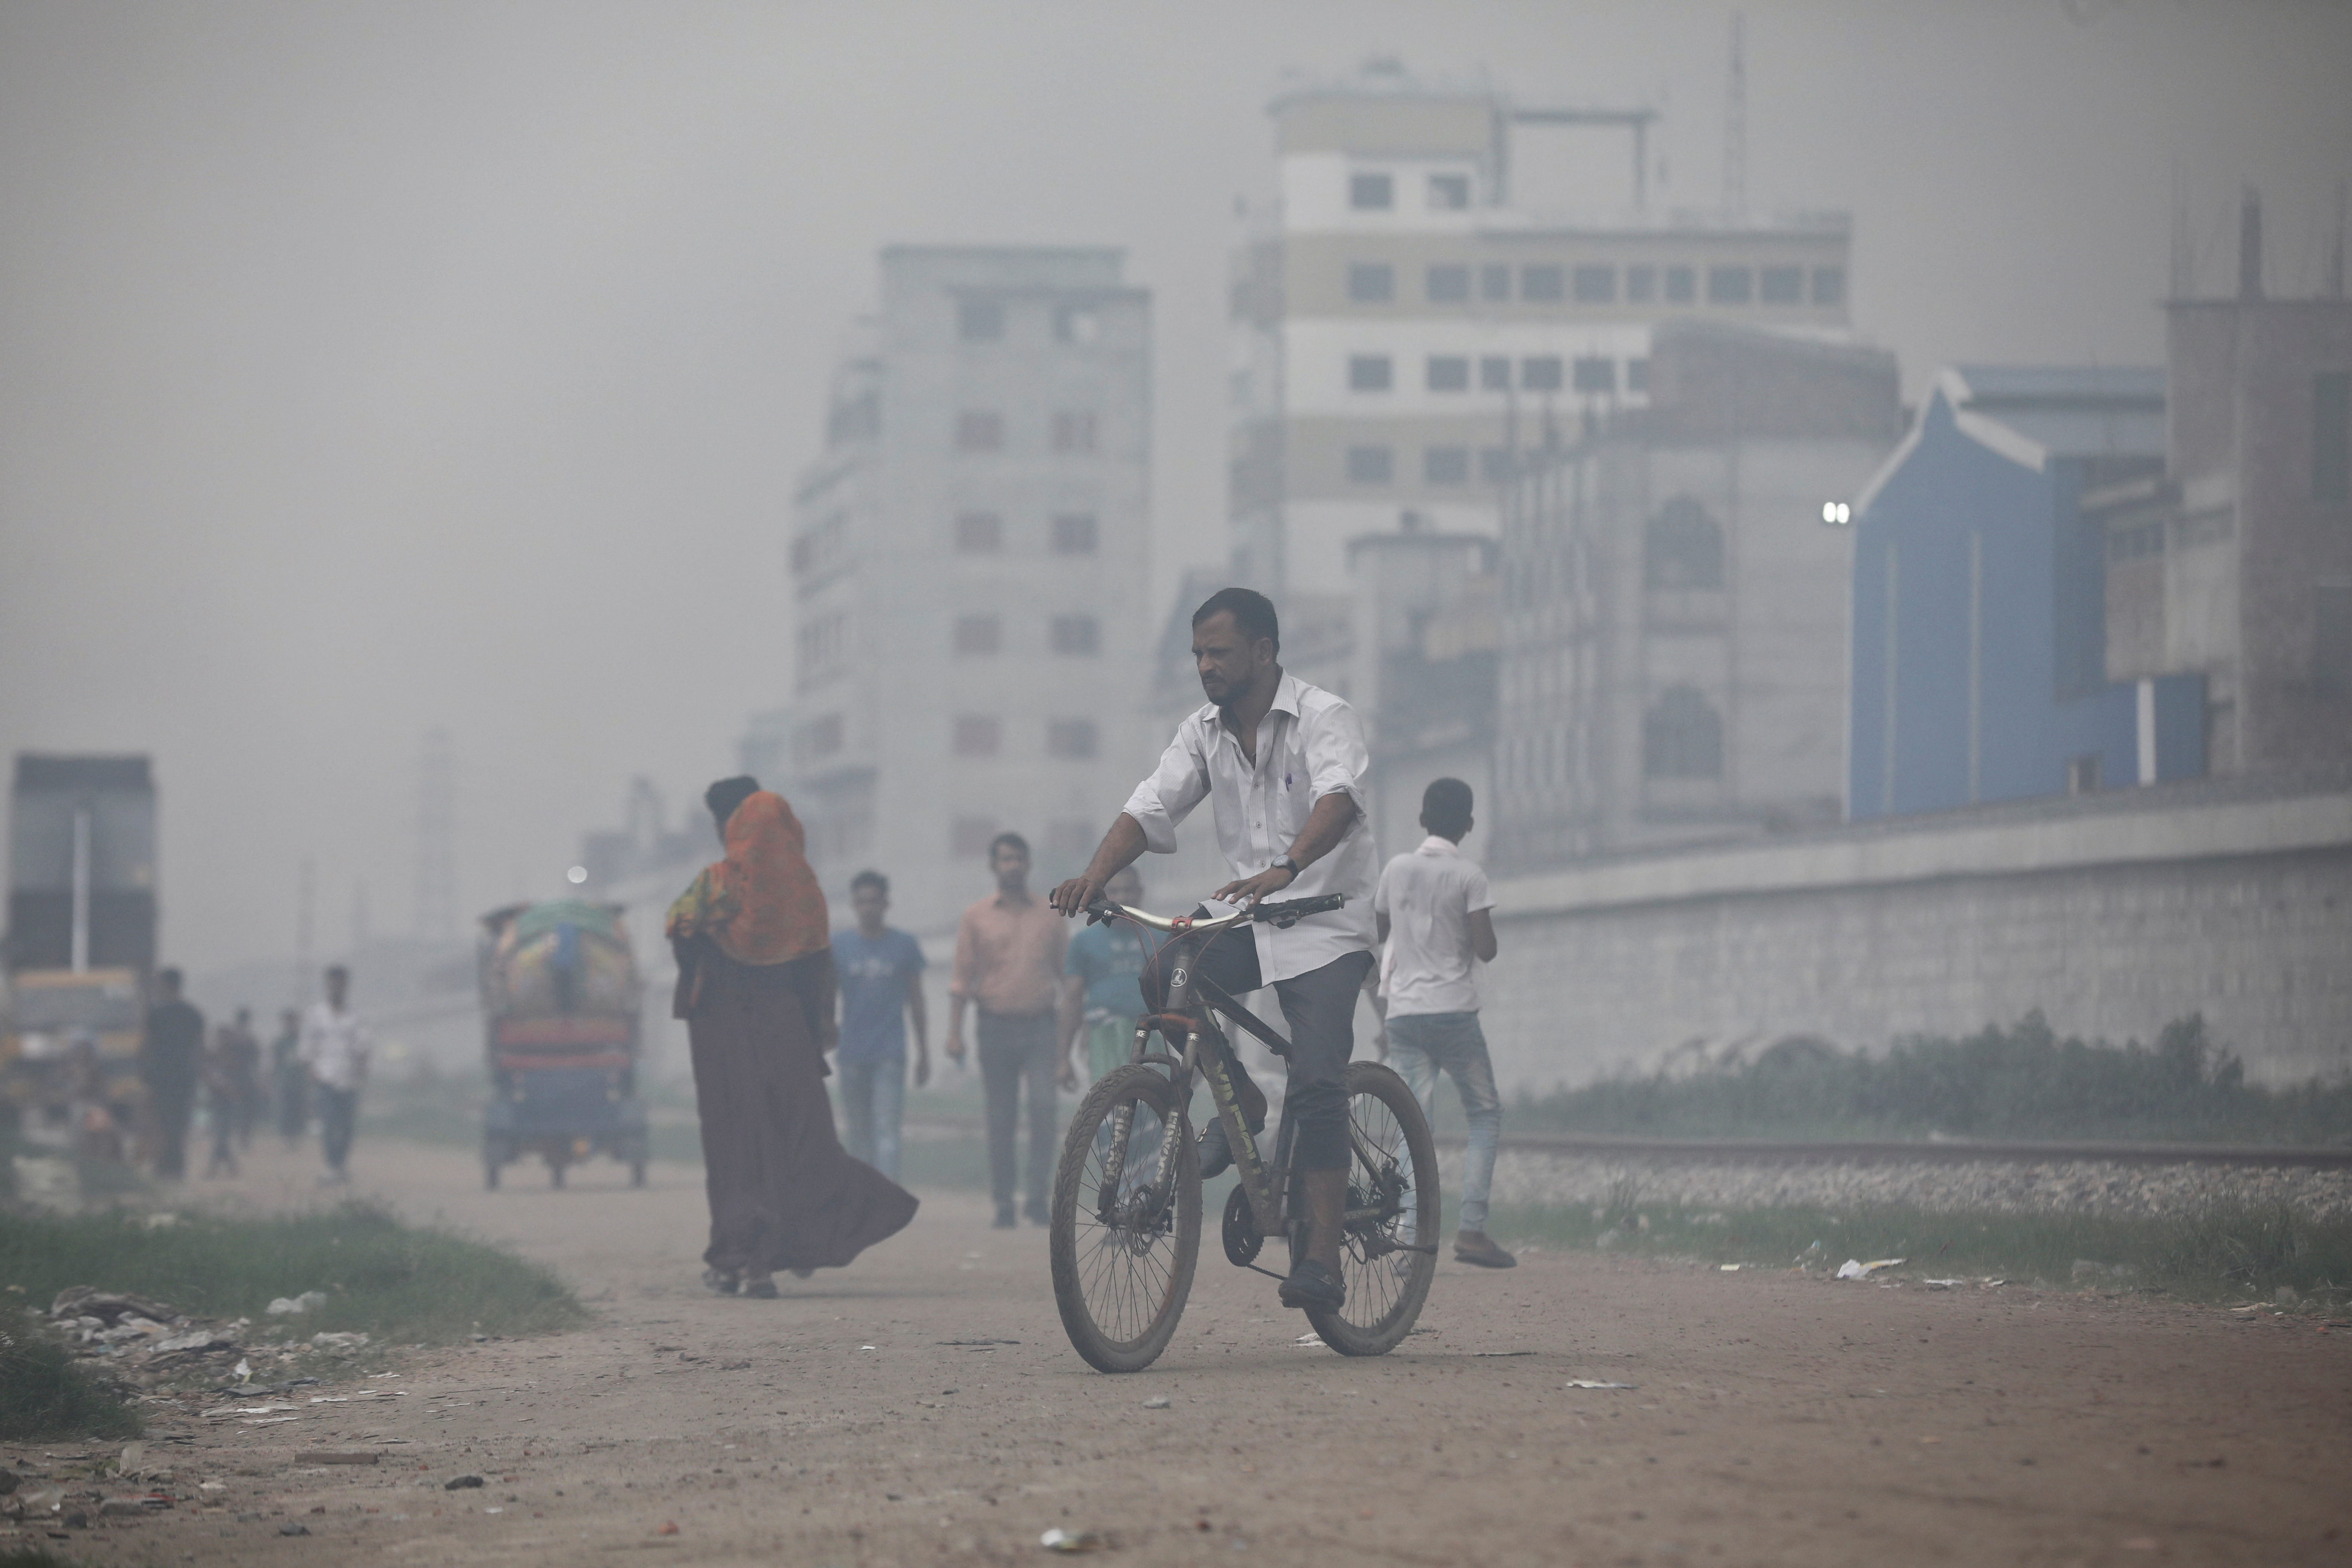 A man rides a bicycle through smoke rising from steel mills located near a slum in Dhaka